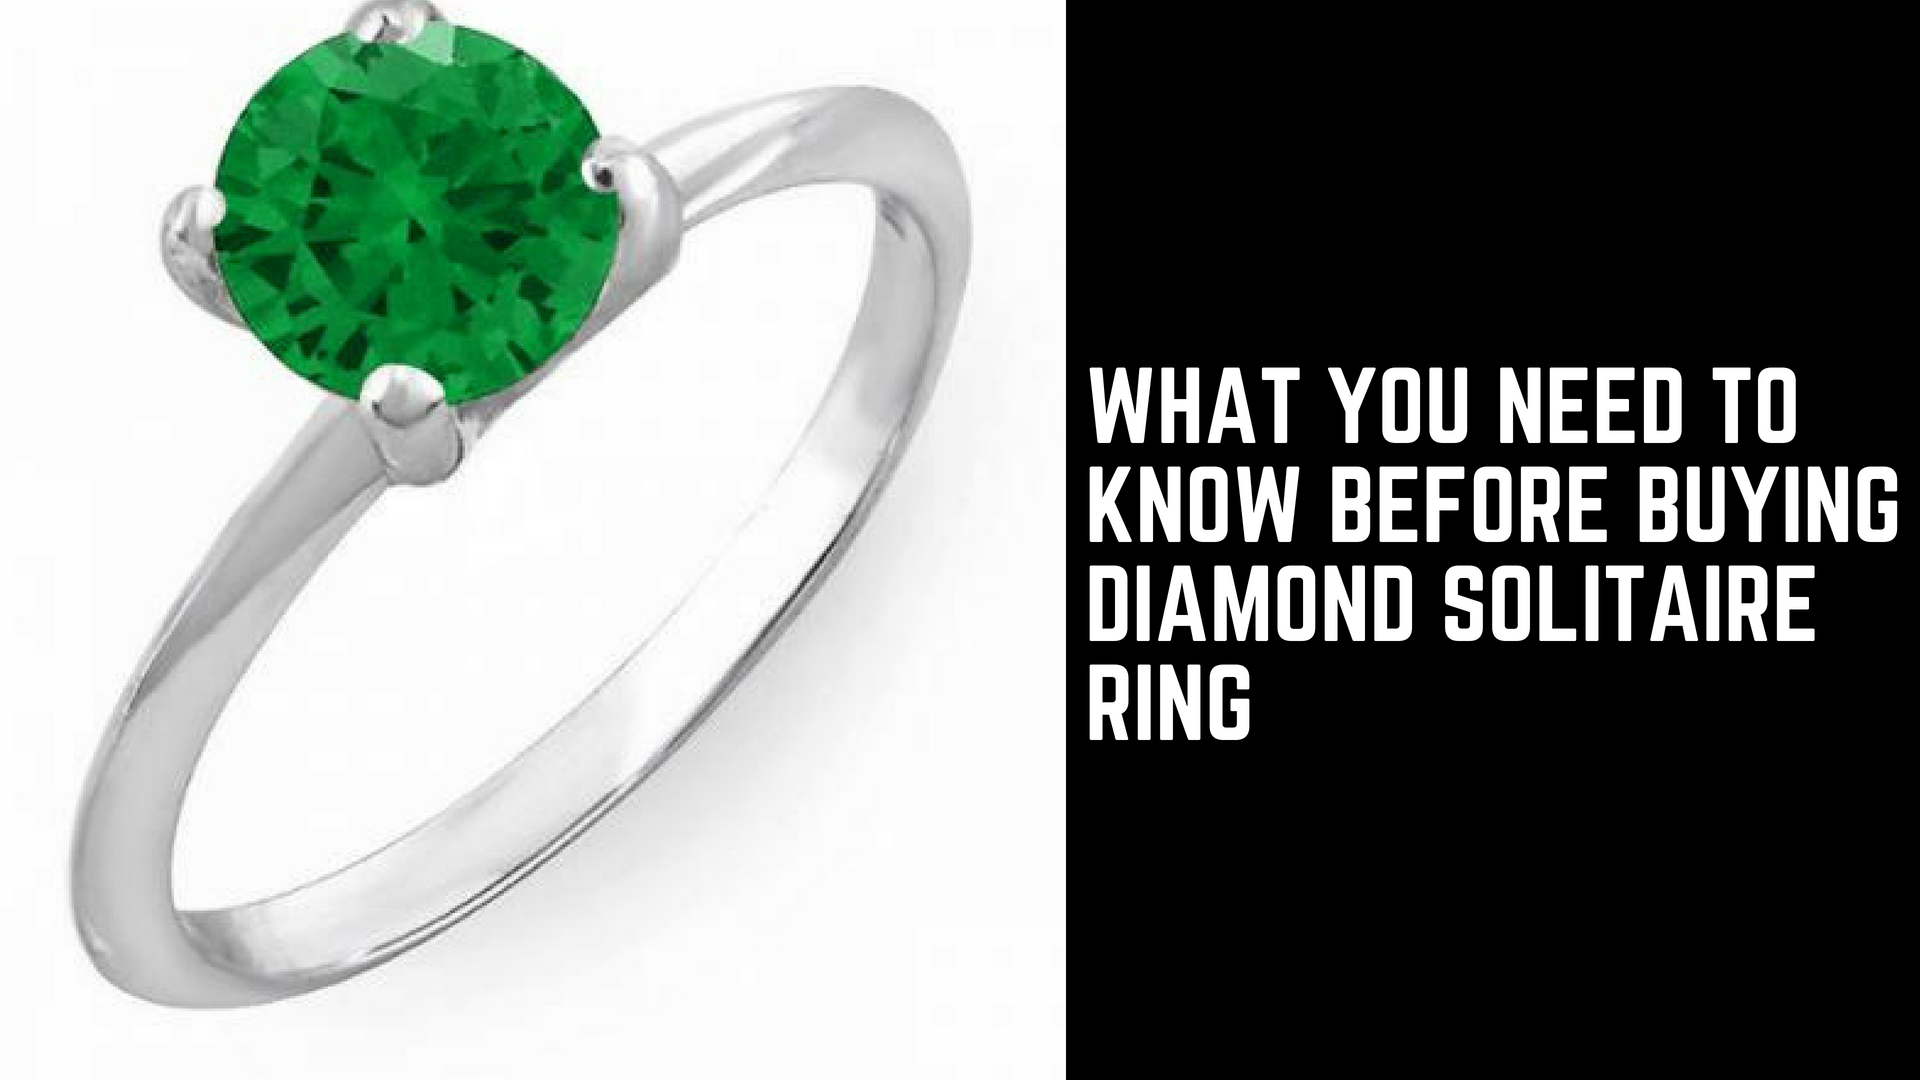 What You Need To Know Before Buying Diamond Solitaire Ring